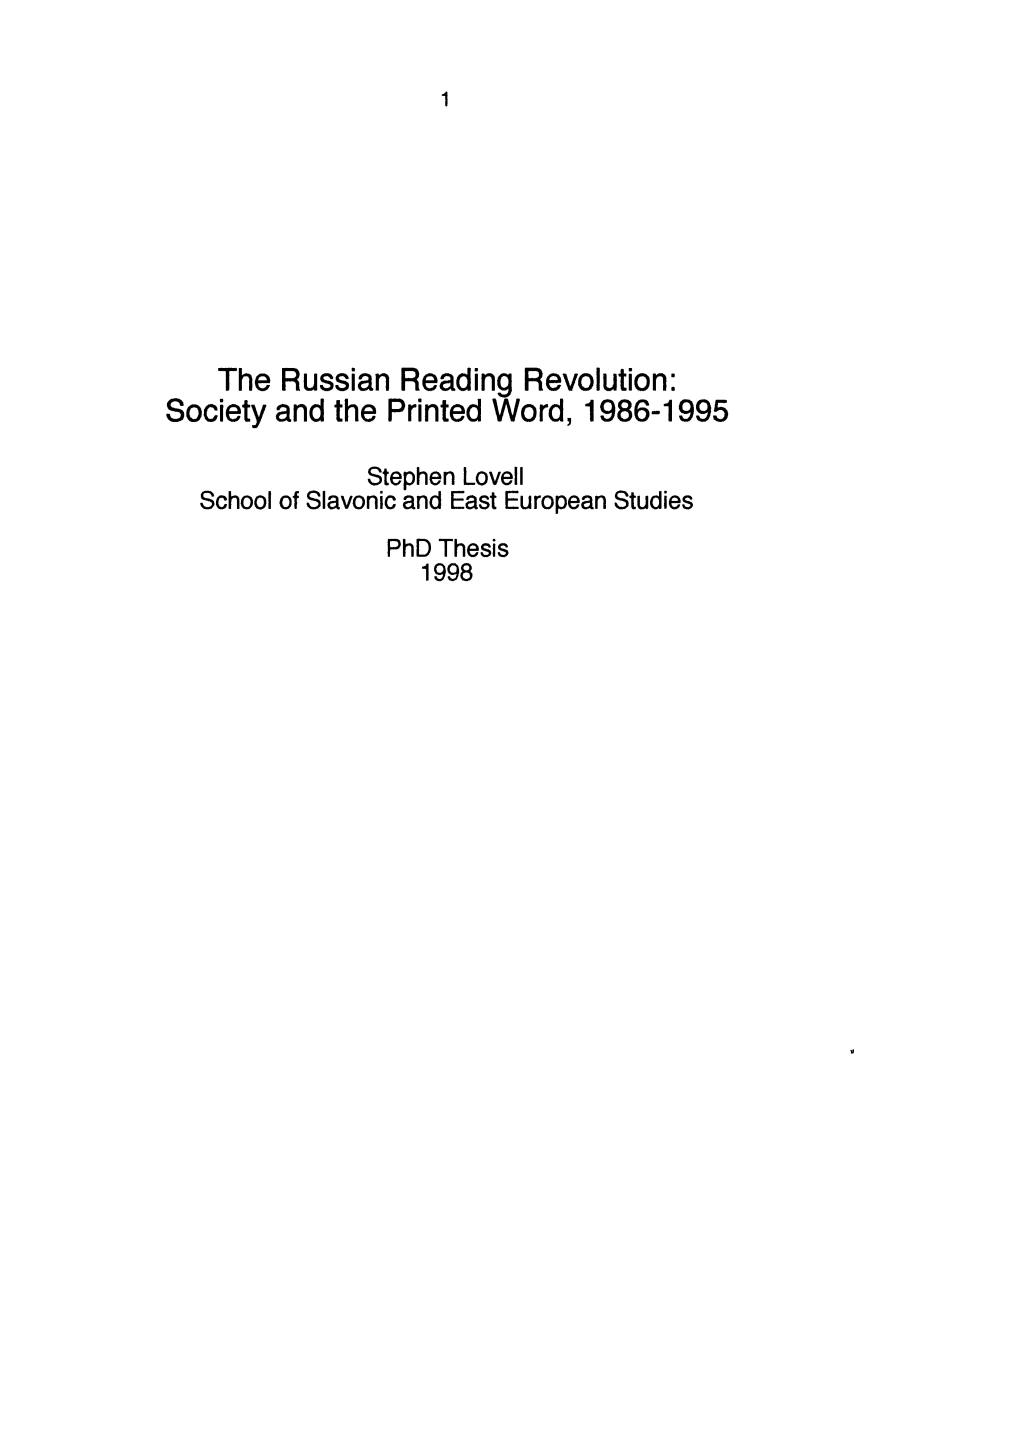 The Russian Reading Revolution: Society and the Printed World, 1986